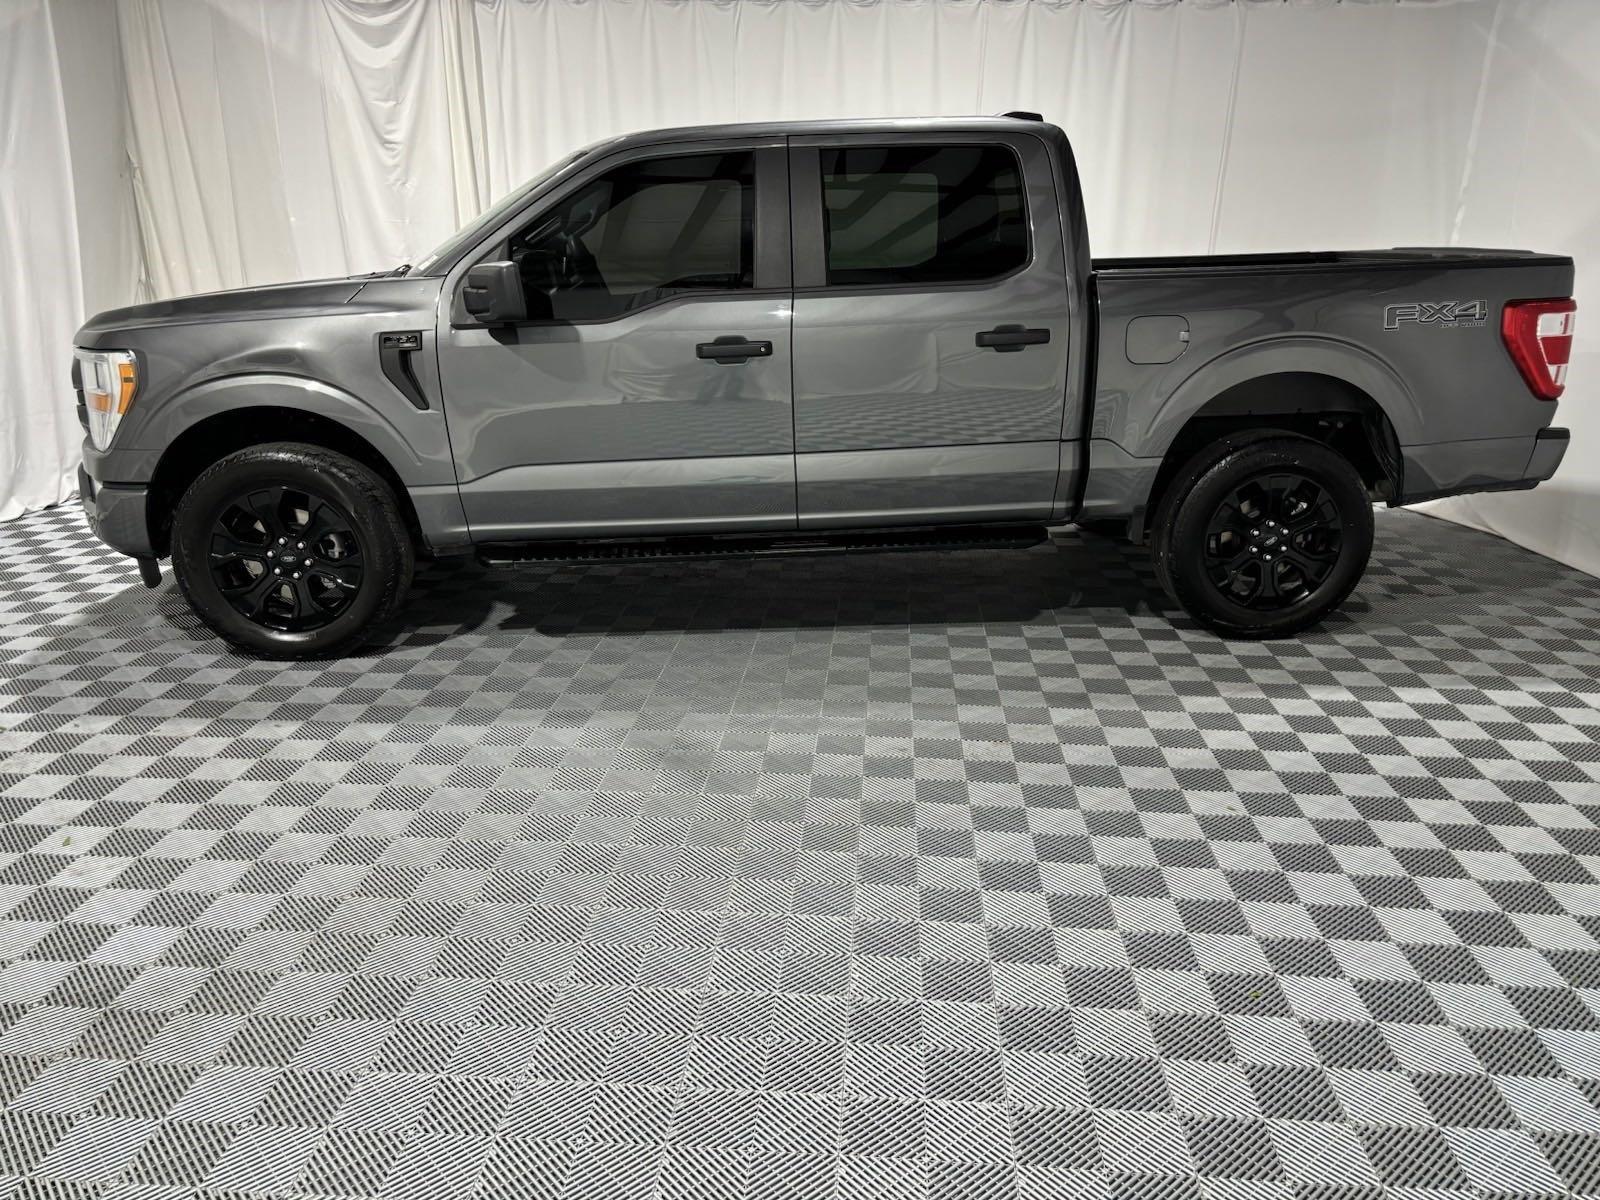 Used 2022 Ford F-150 XL SuperCrew Cab for sale in St Joseph MO